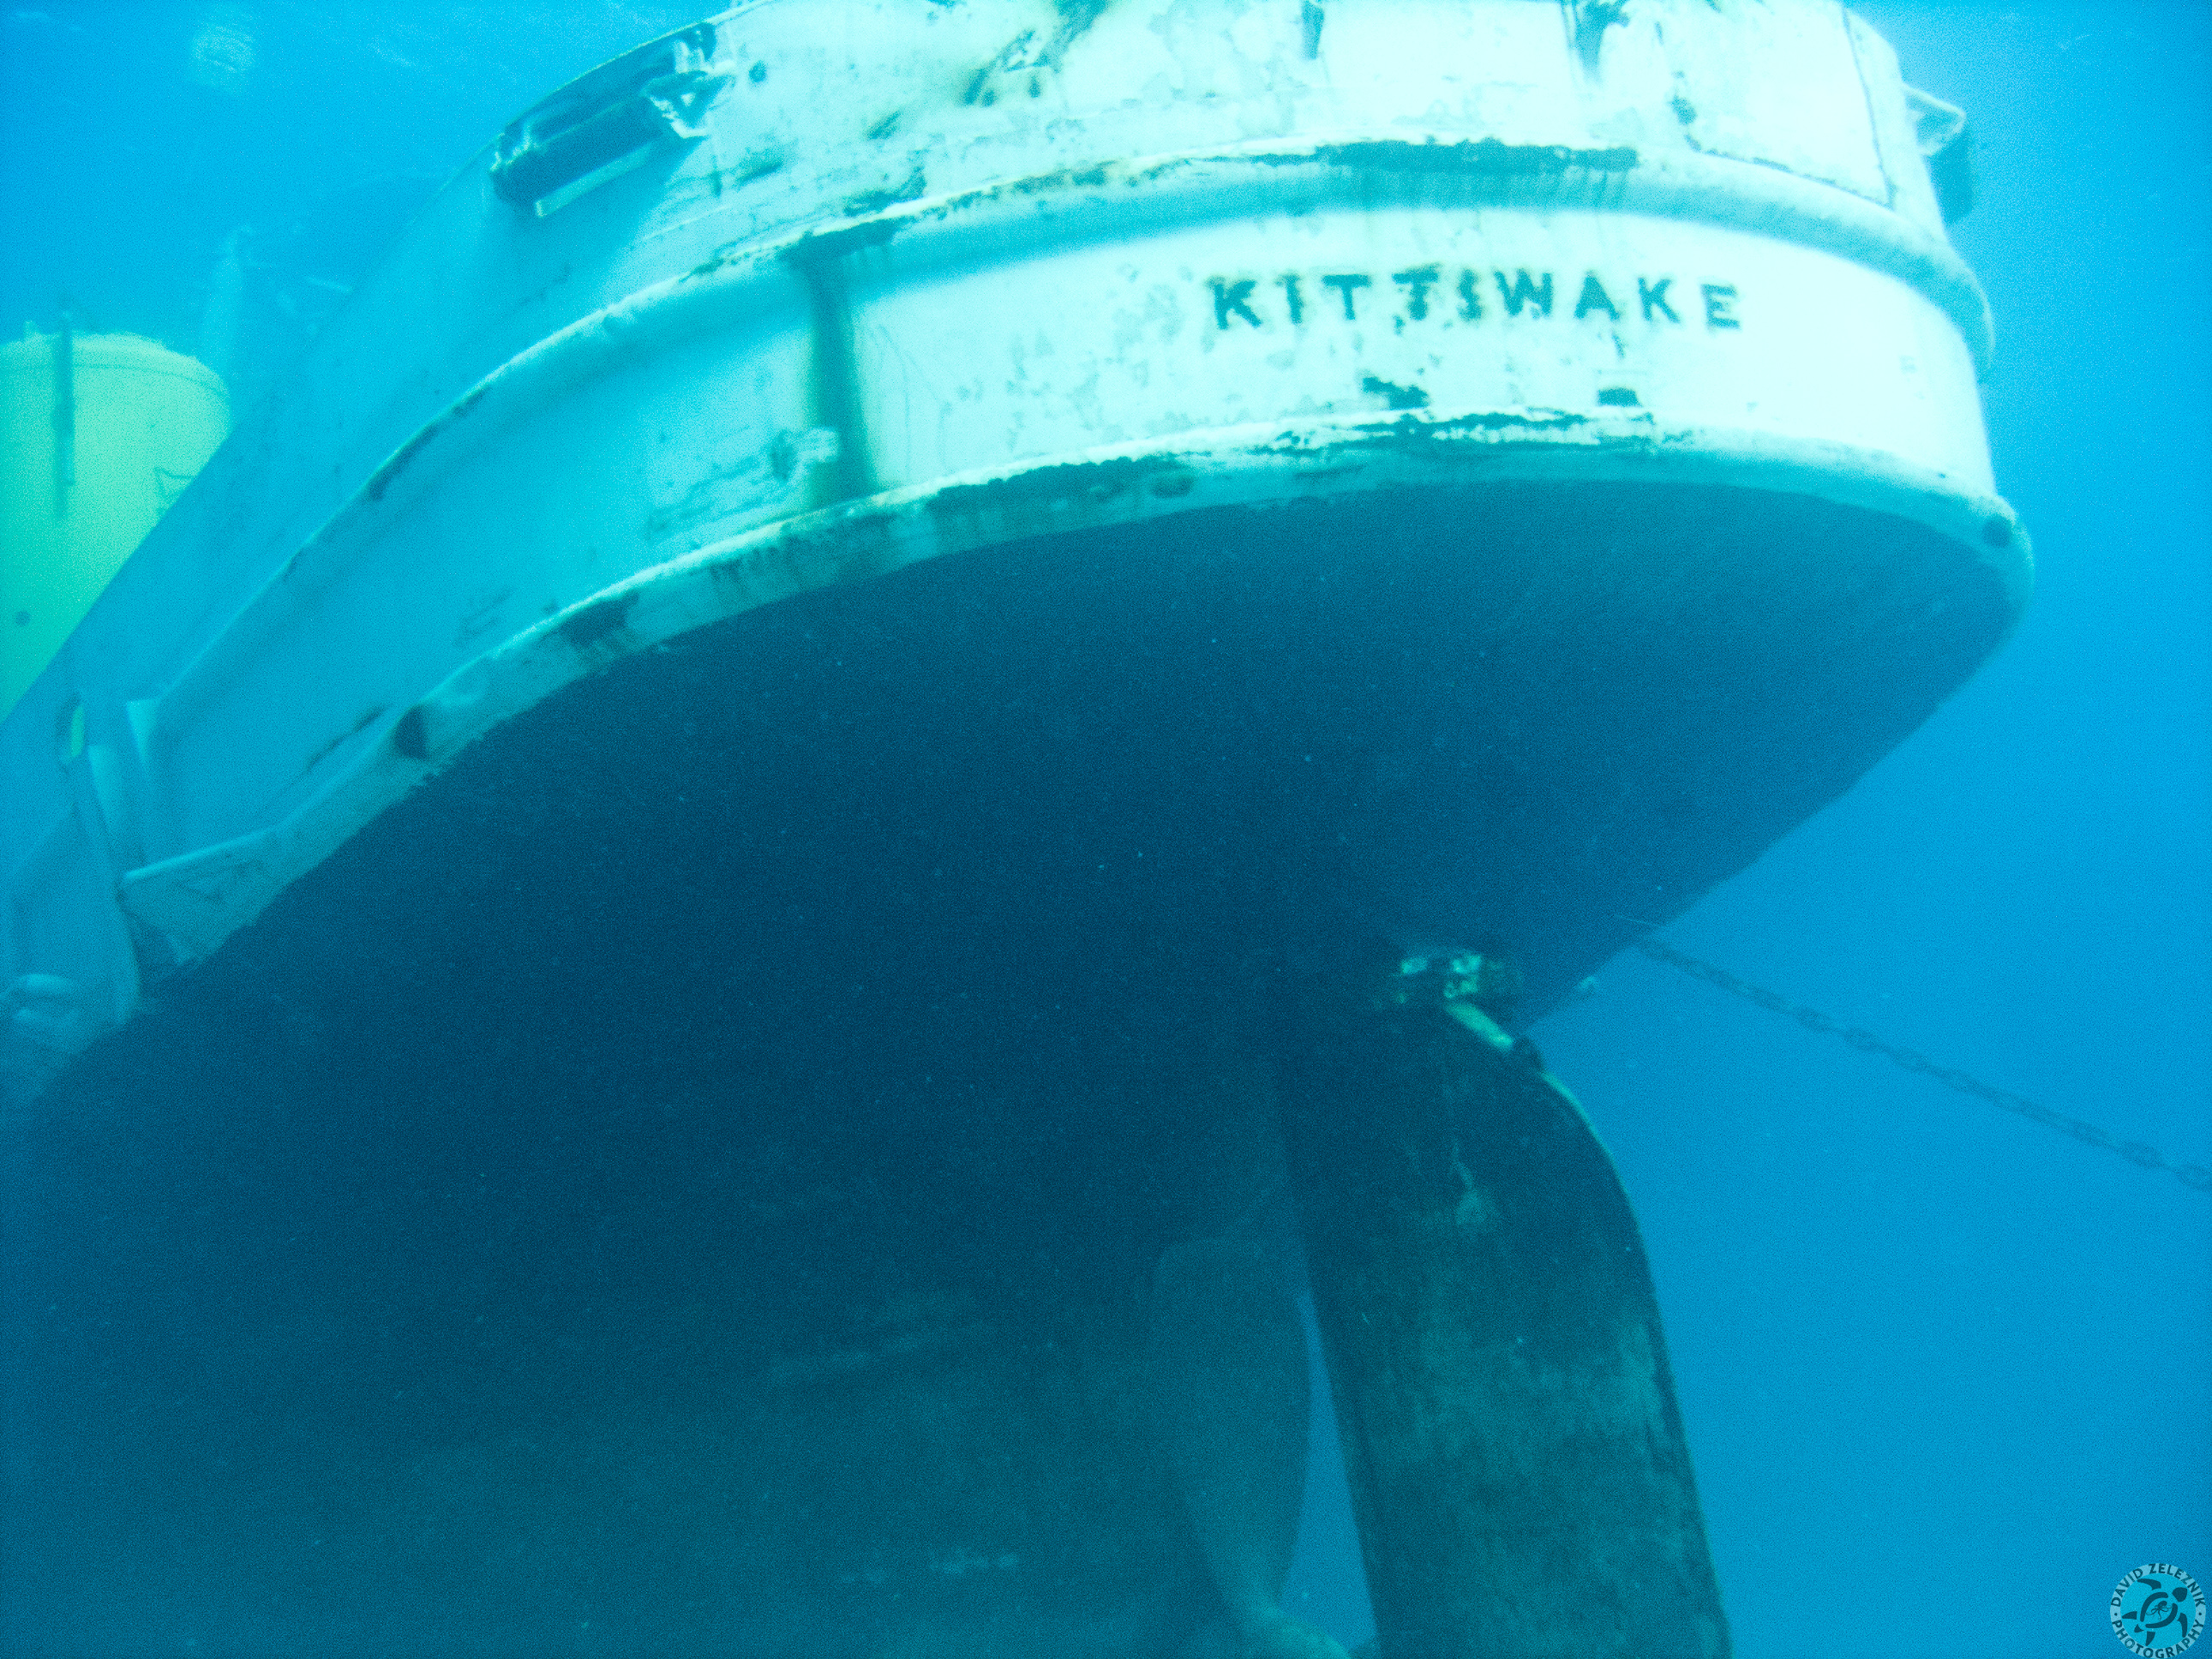 View of the stern of the USS Kittiwake